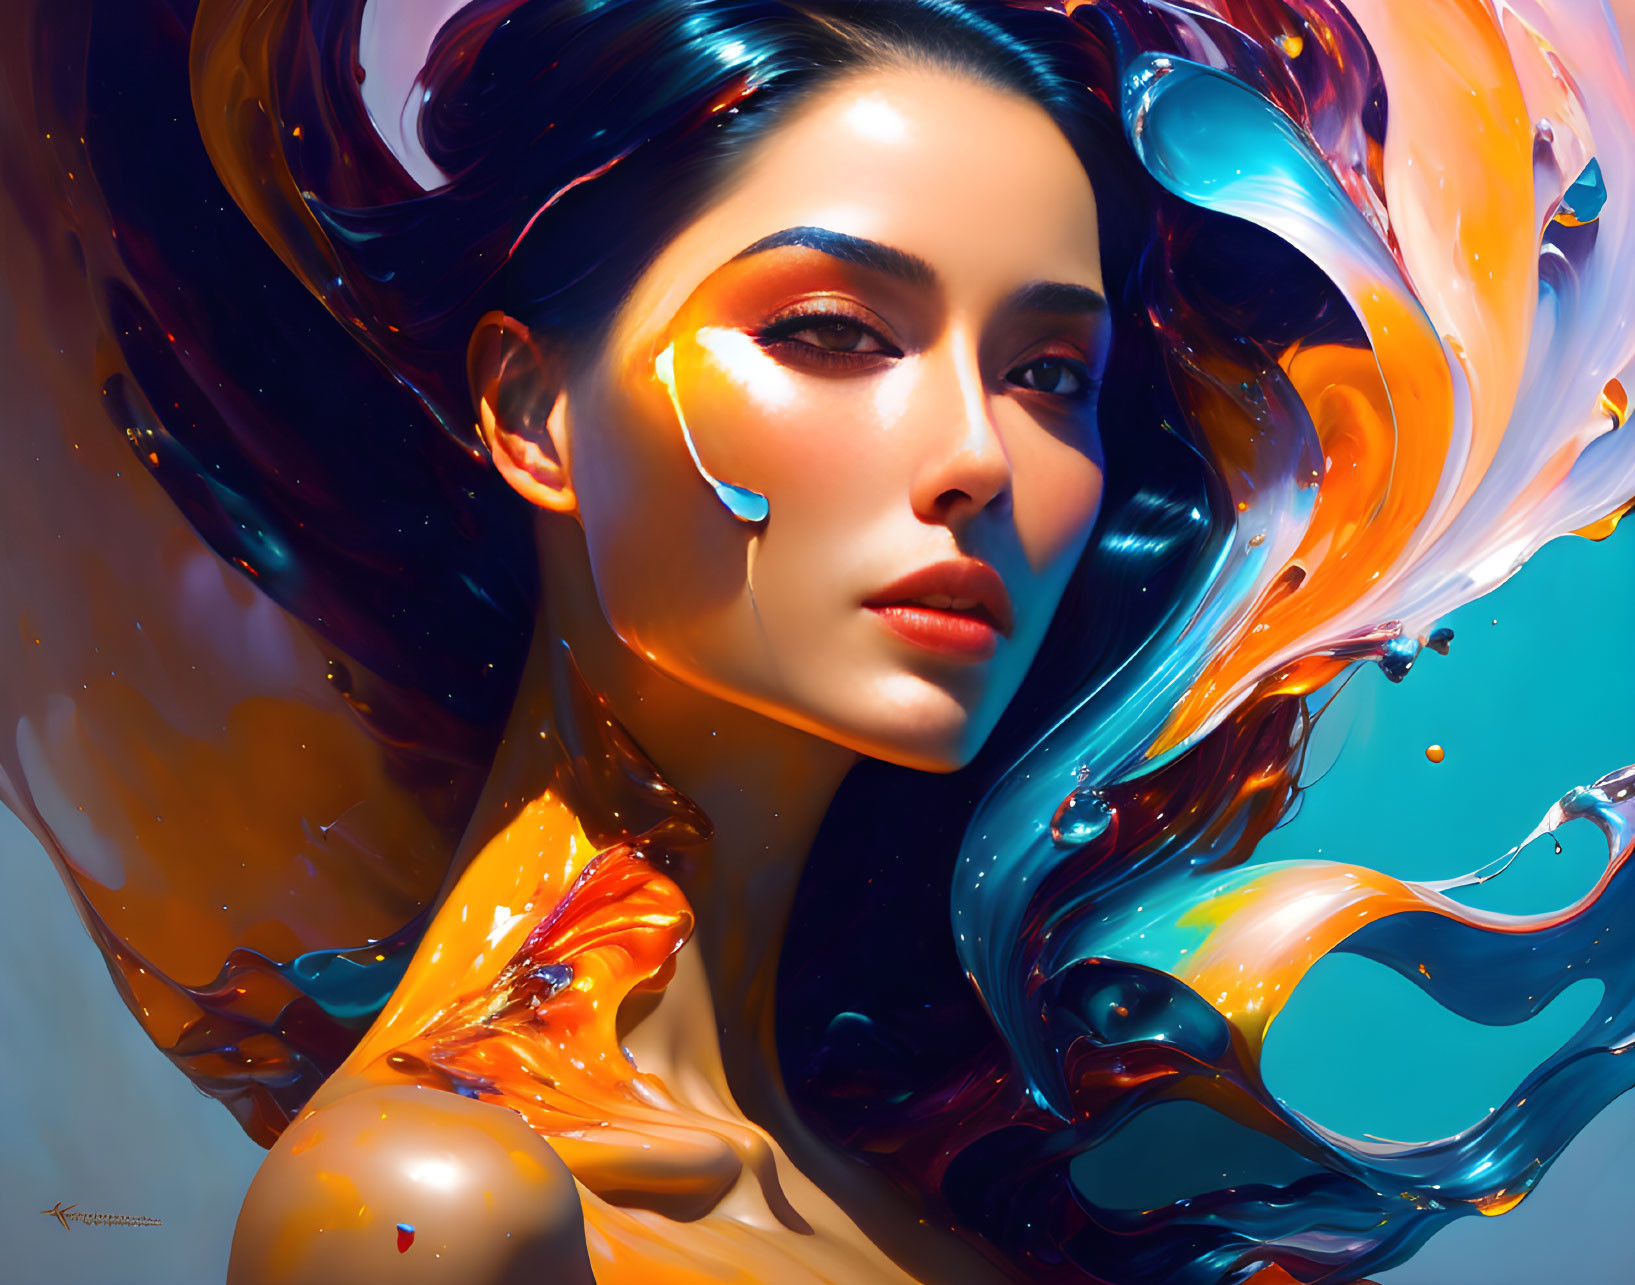 Vibrant digital artwork of a woman with flowing blue, orange, and white hair